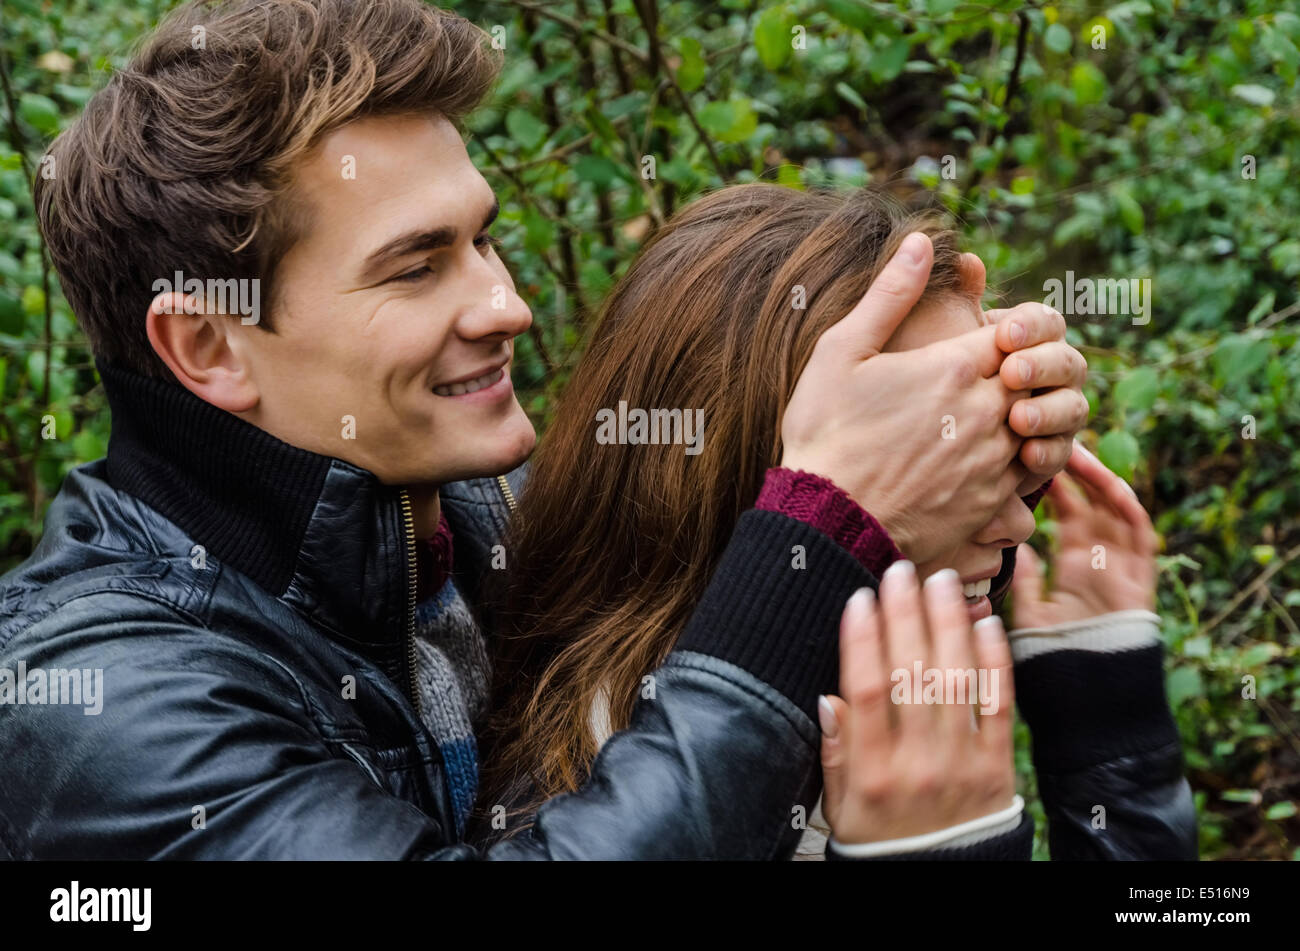 Man Covering Woman's Eyes In Park Stock Photo